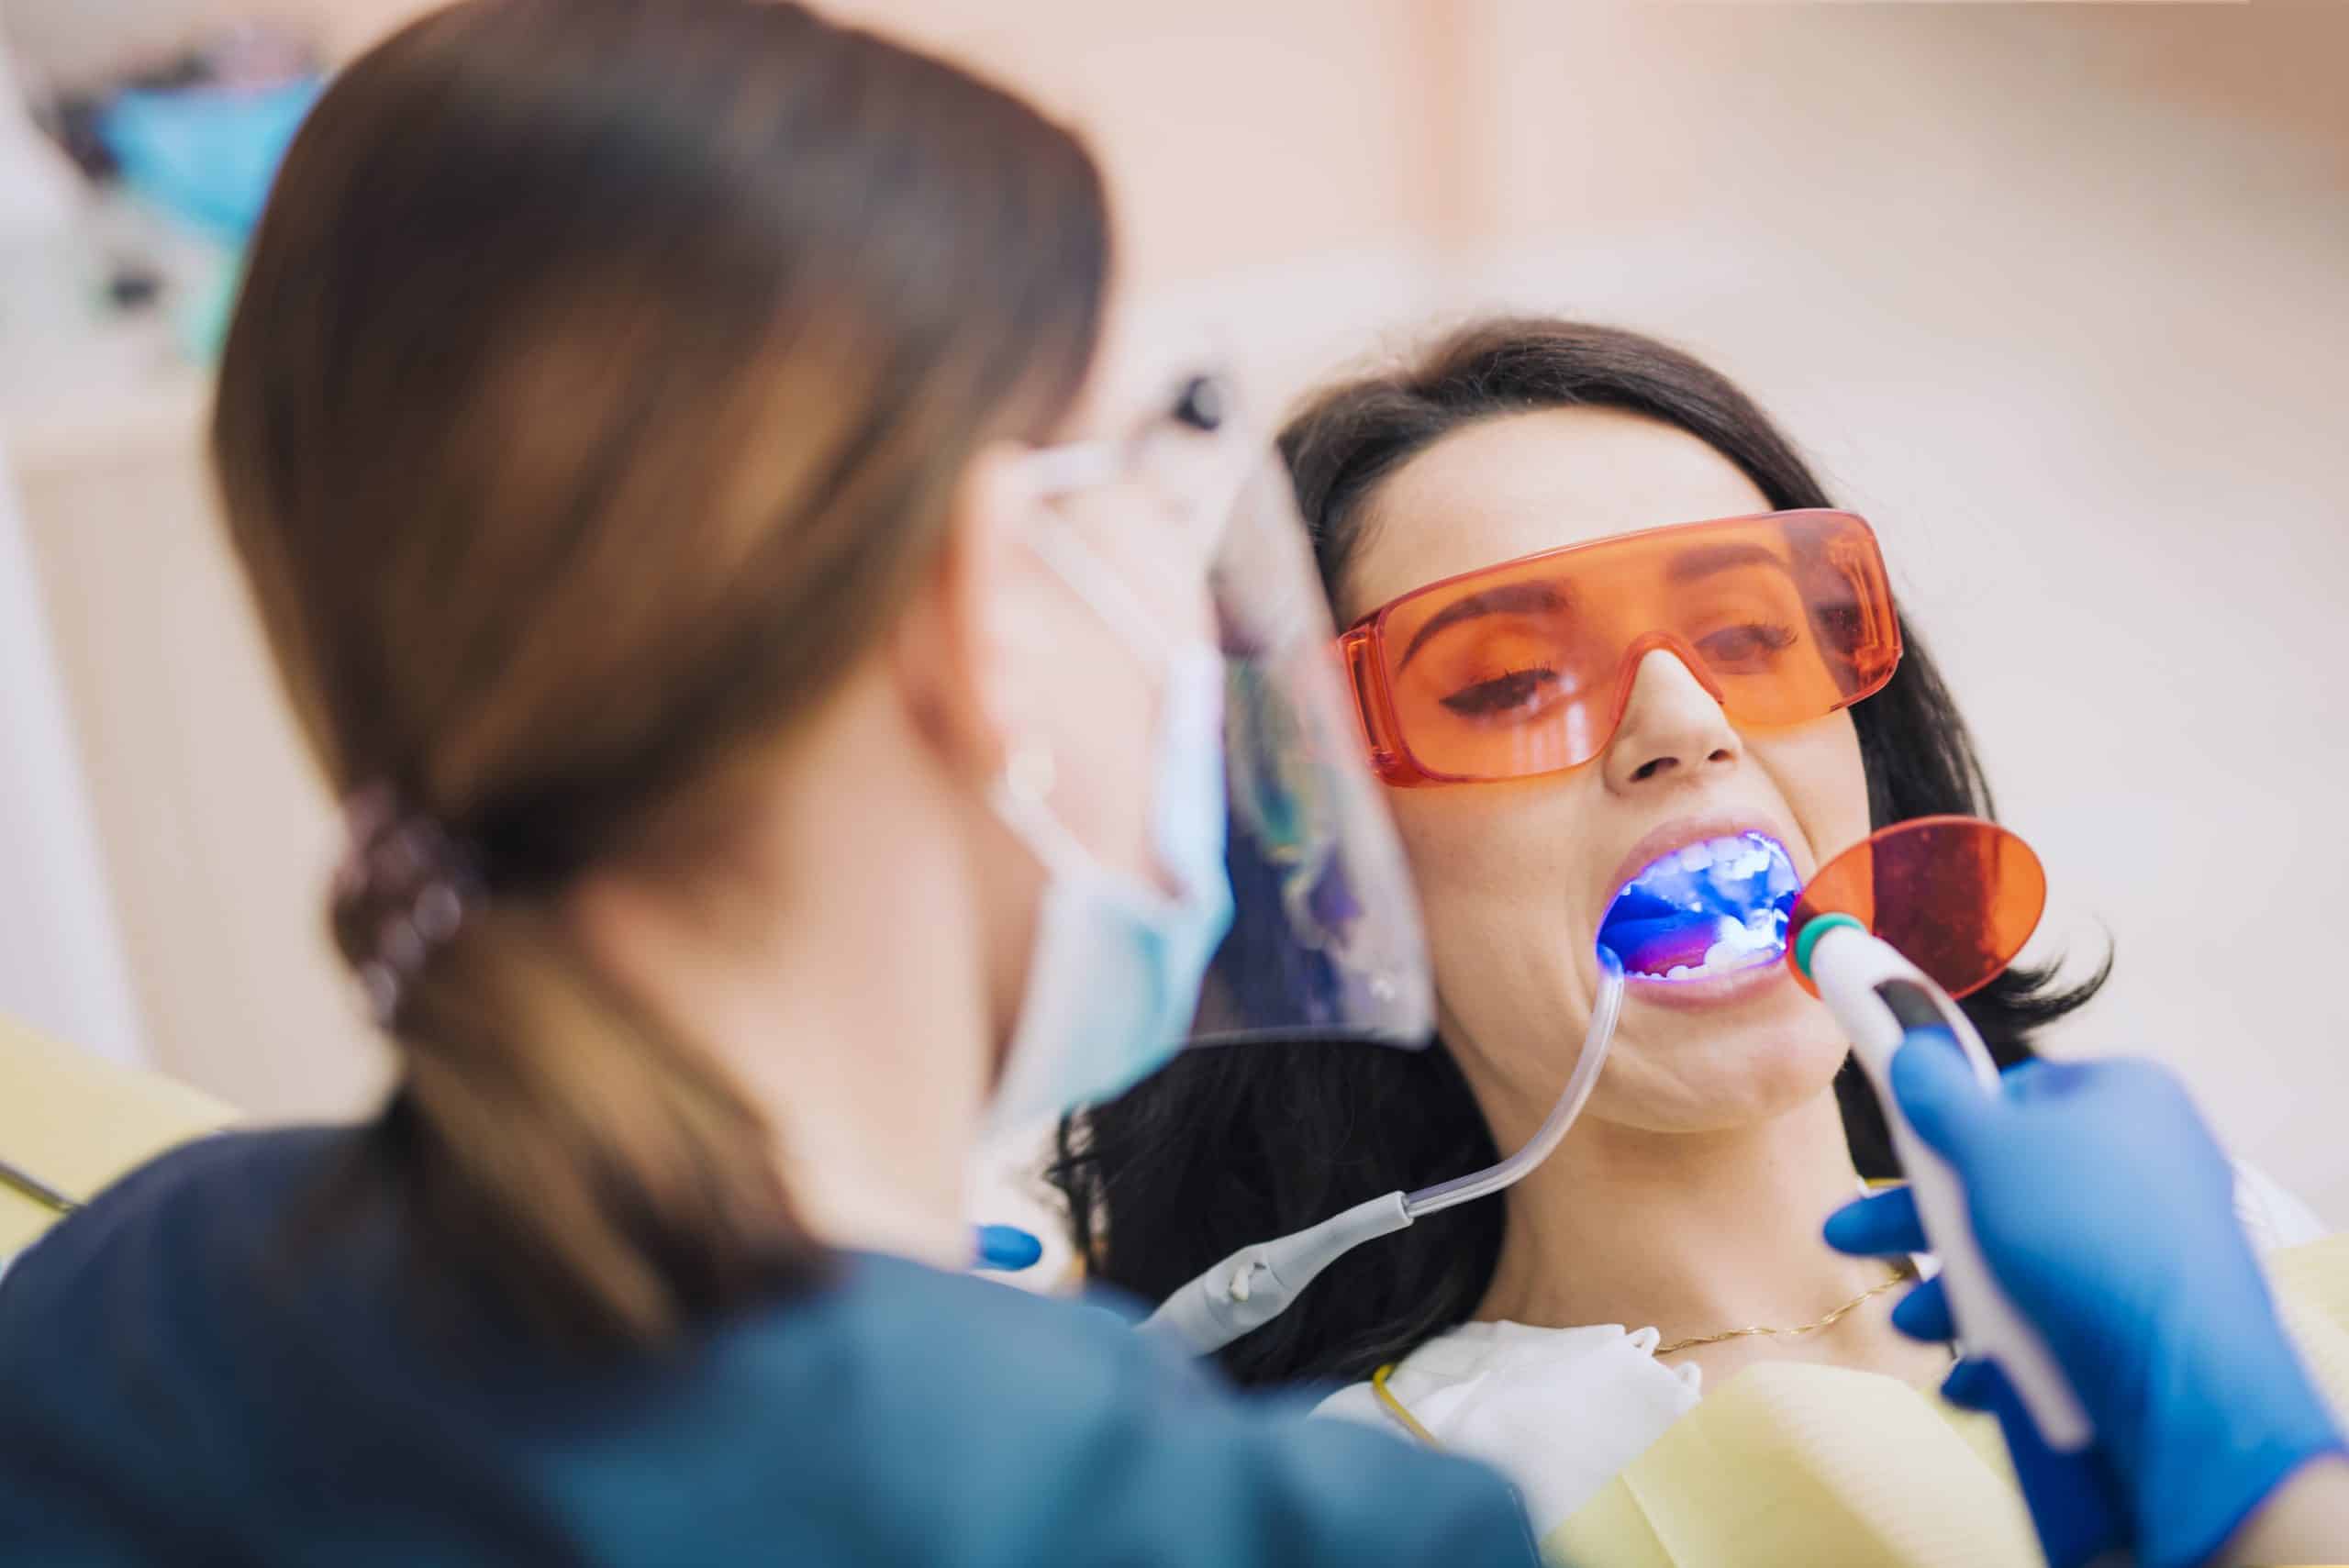 In Chair teeth withening is much more effective that home teeth whitening kits and uses ultraviolet light at the end of the procedure to produce a whiter effect.